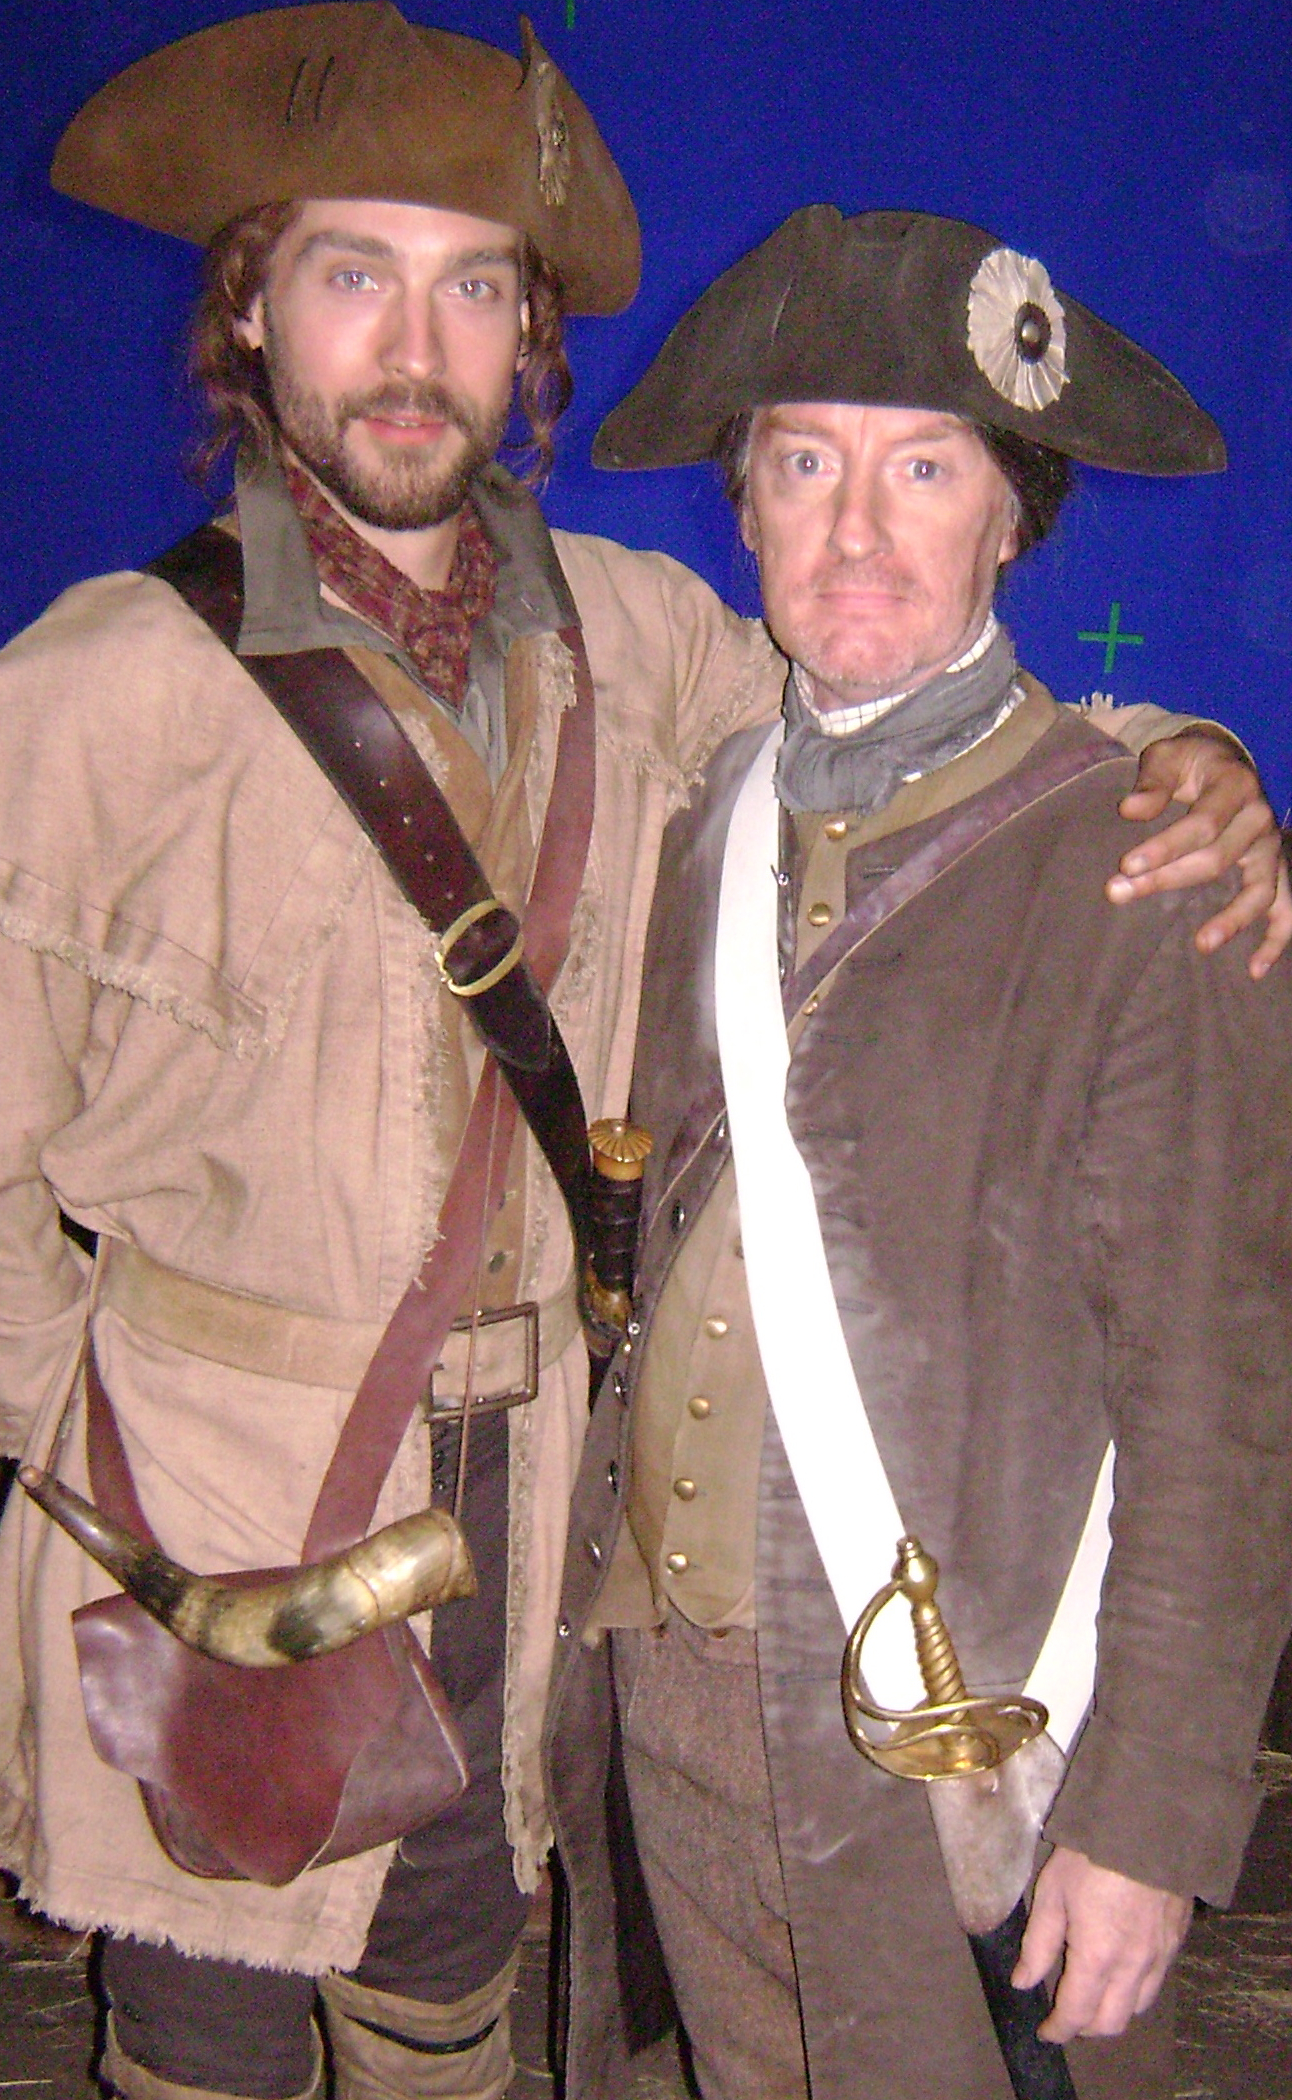 Tom Mison and William Neenan on the set of 'Sleepy Hollow'